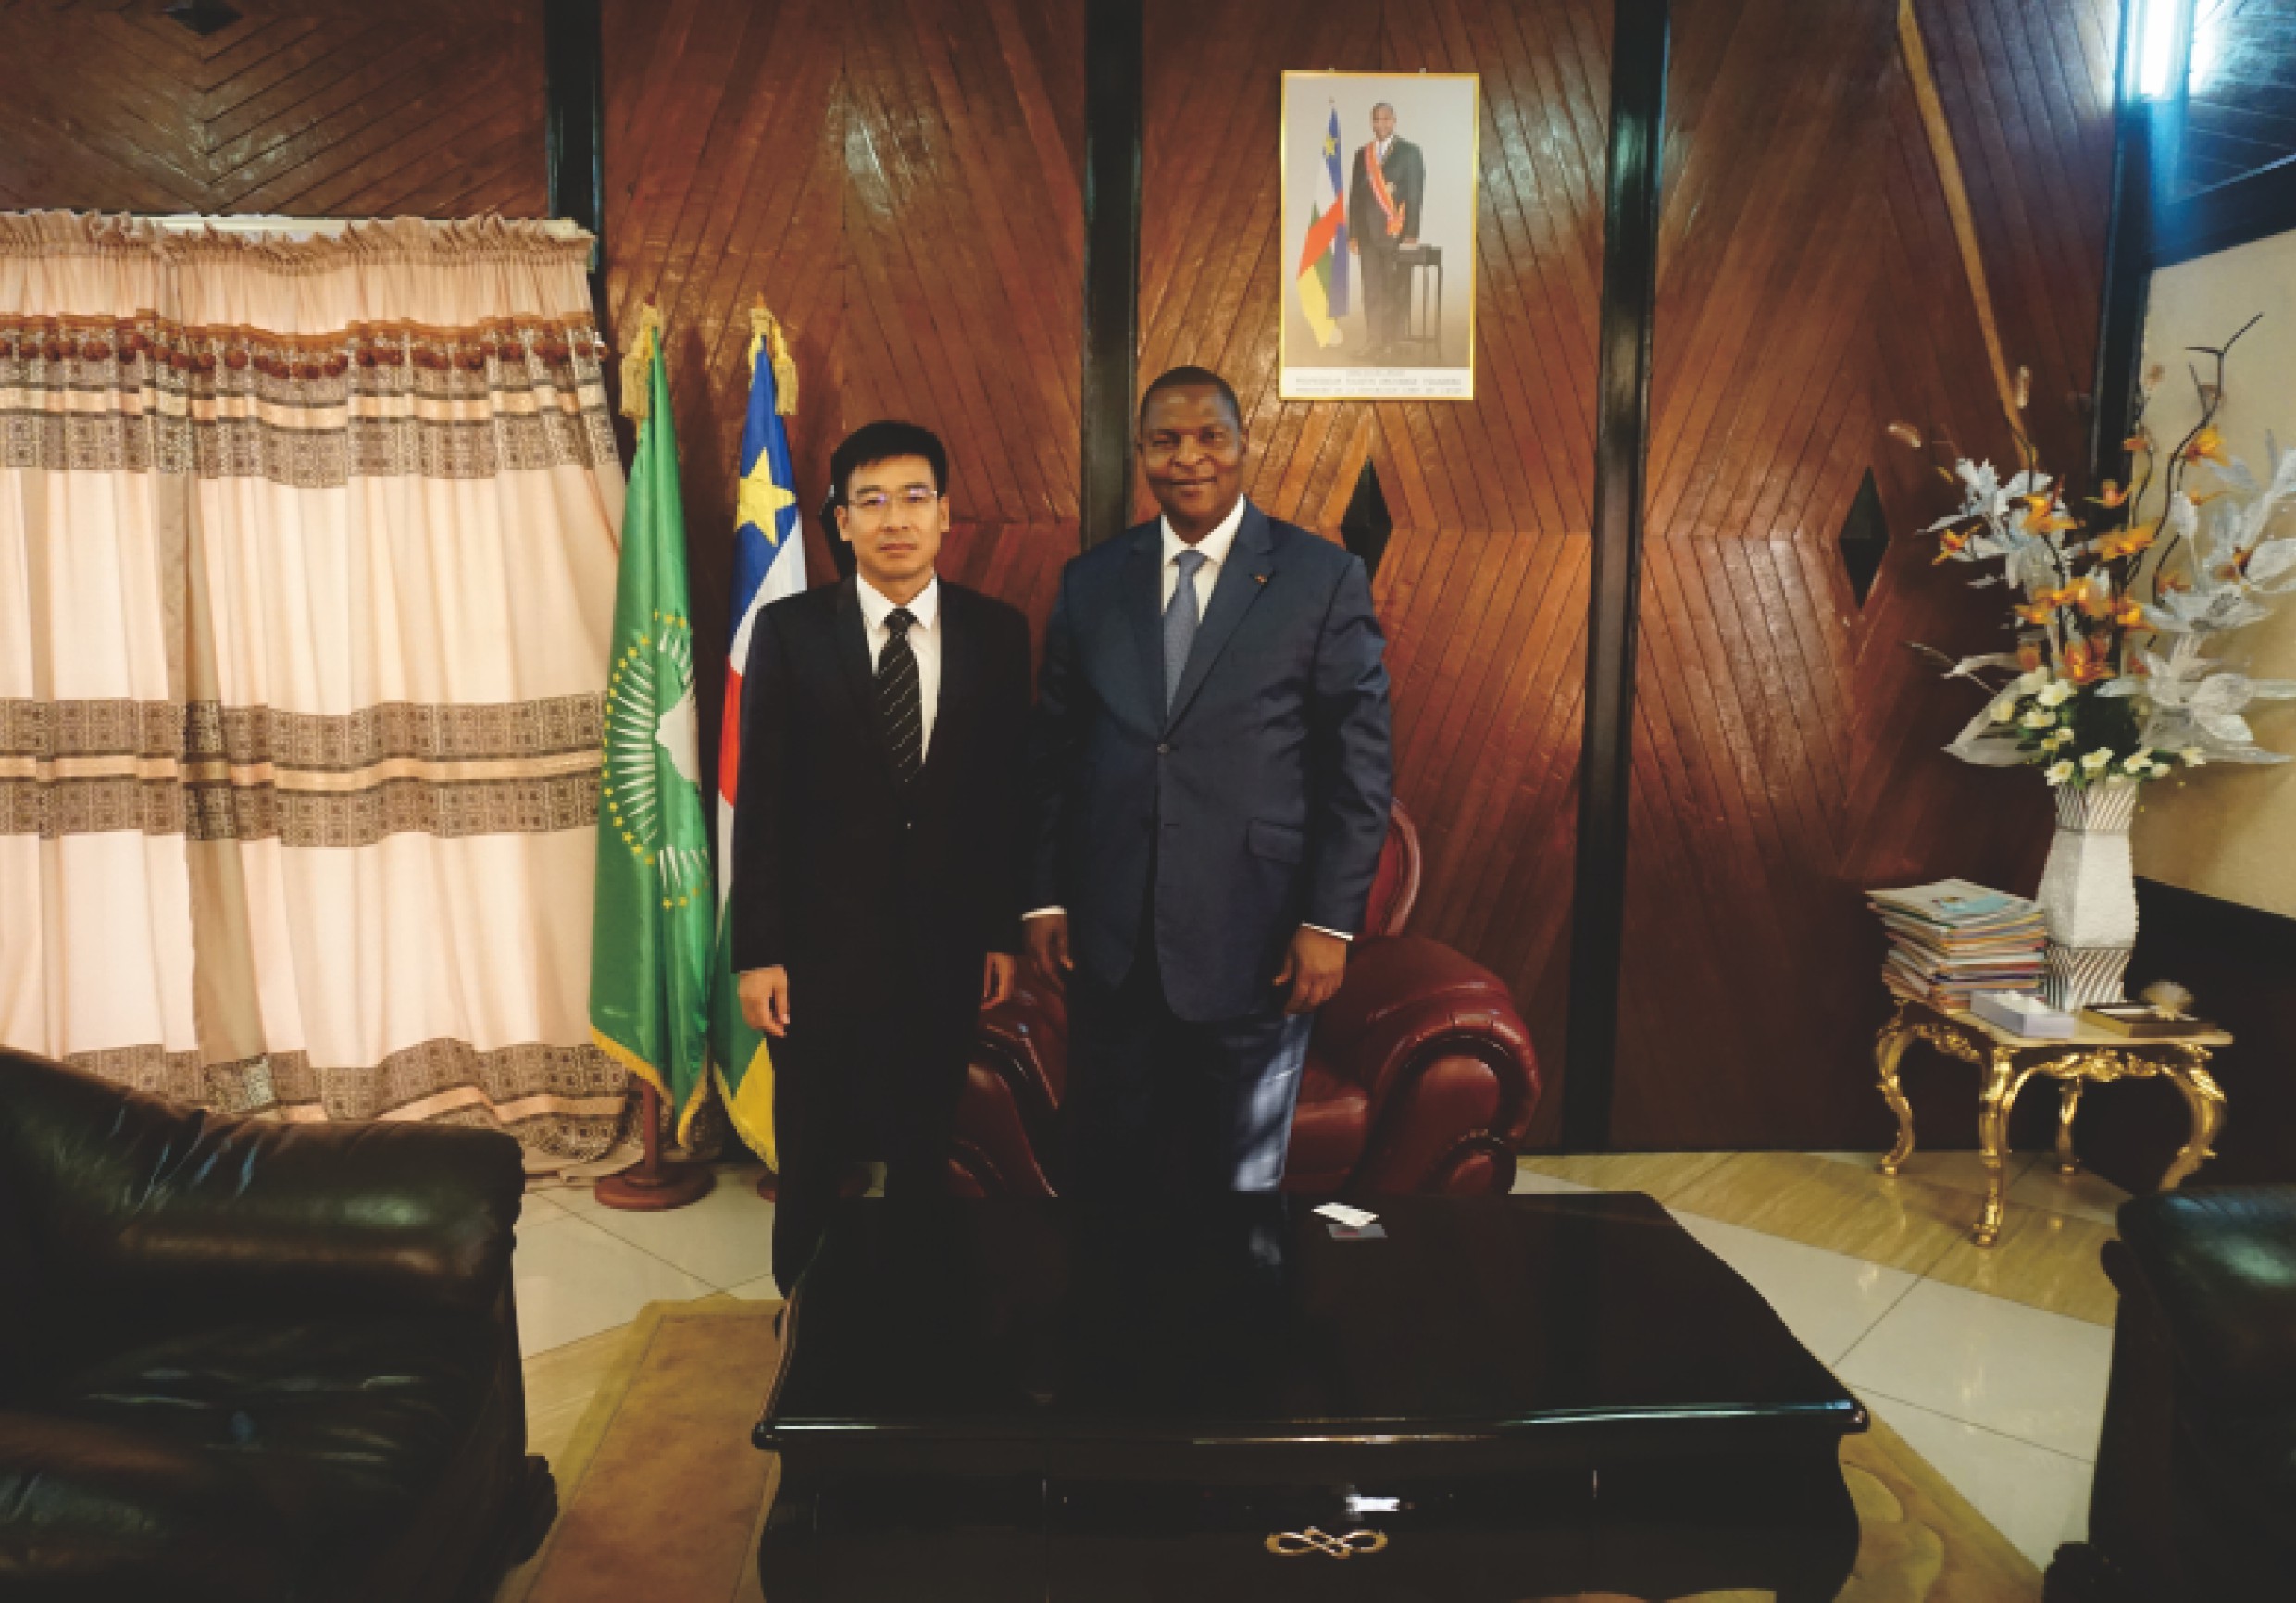 Company leaders visit the President of the Central African Republic